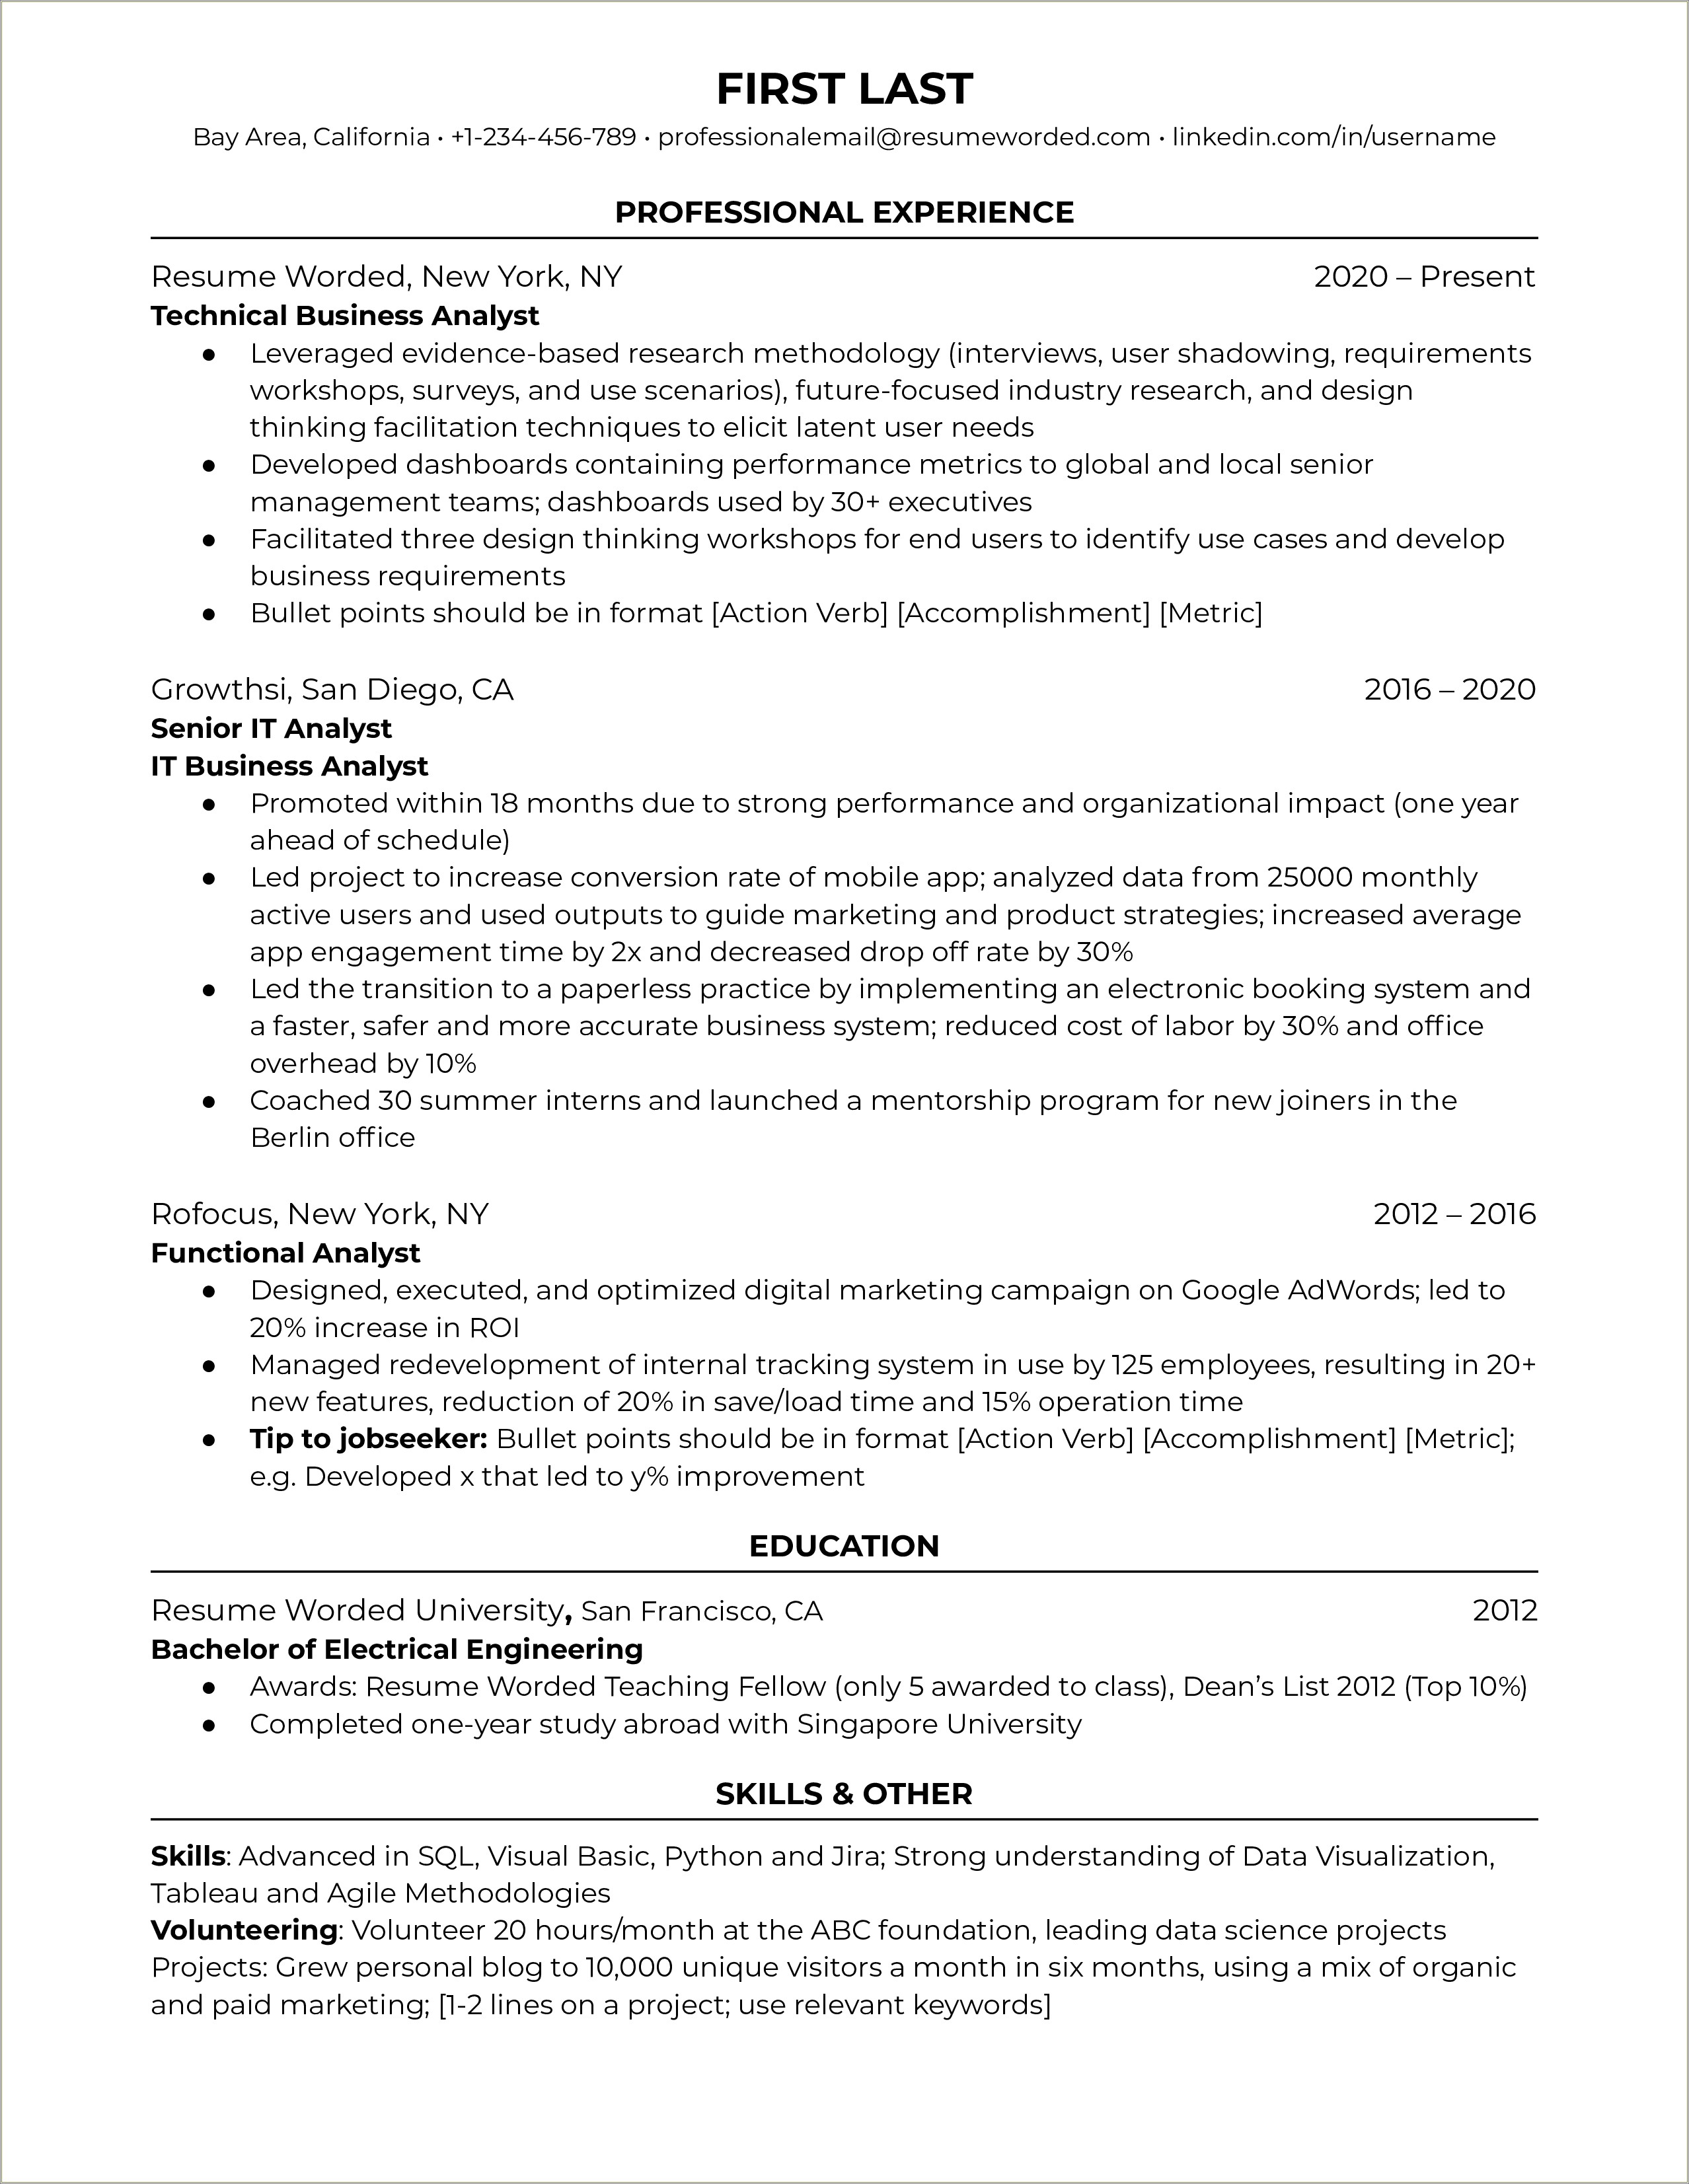 Lead It Support Analyst Resume Samples